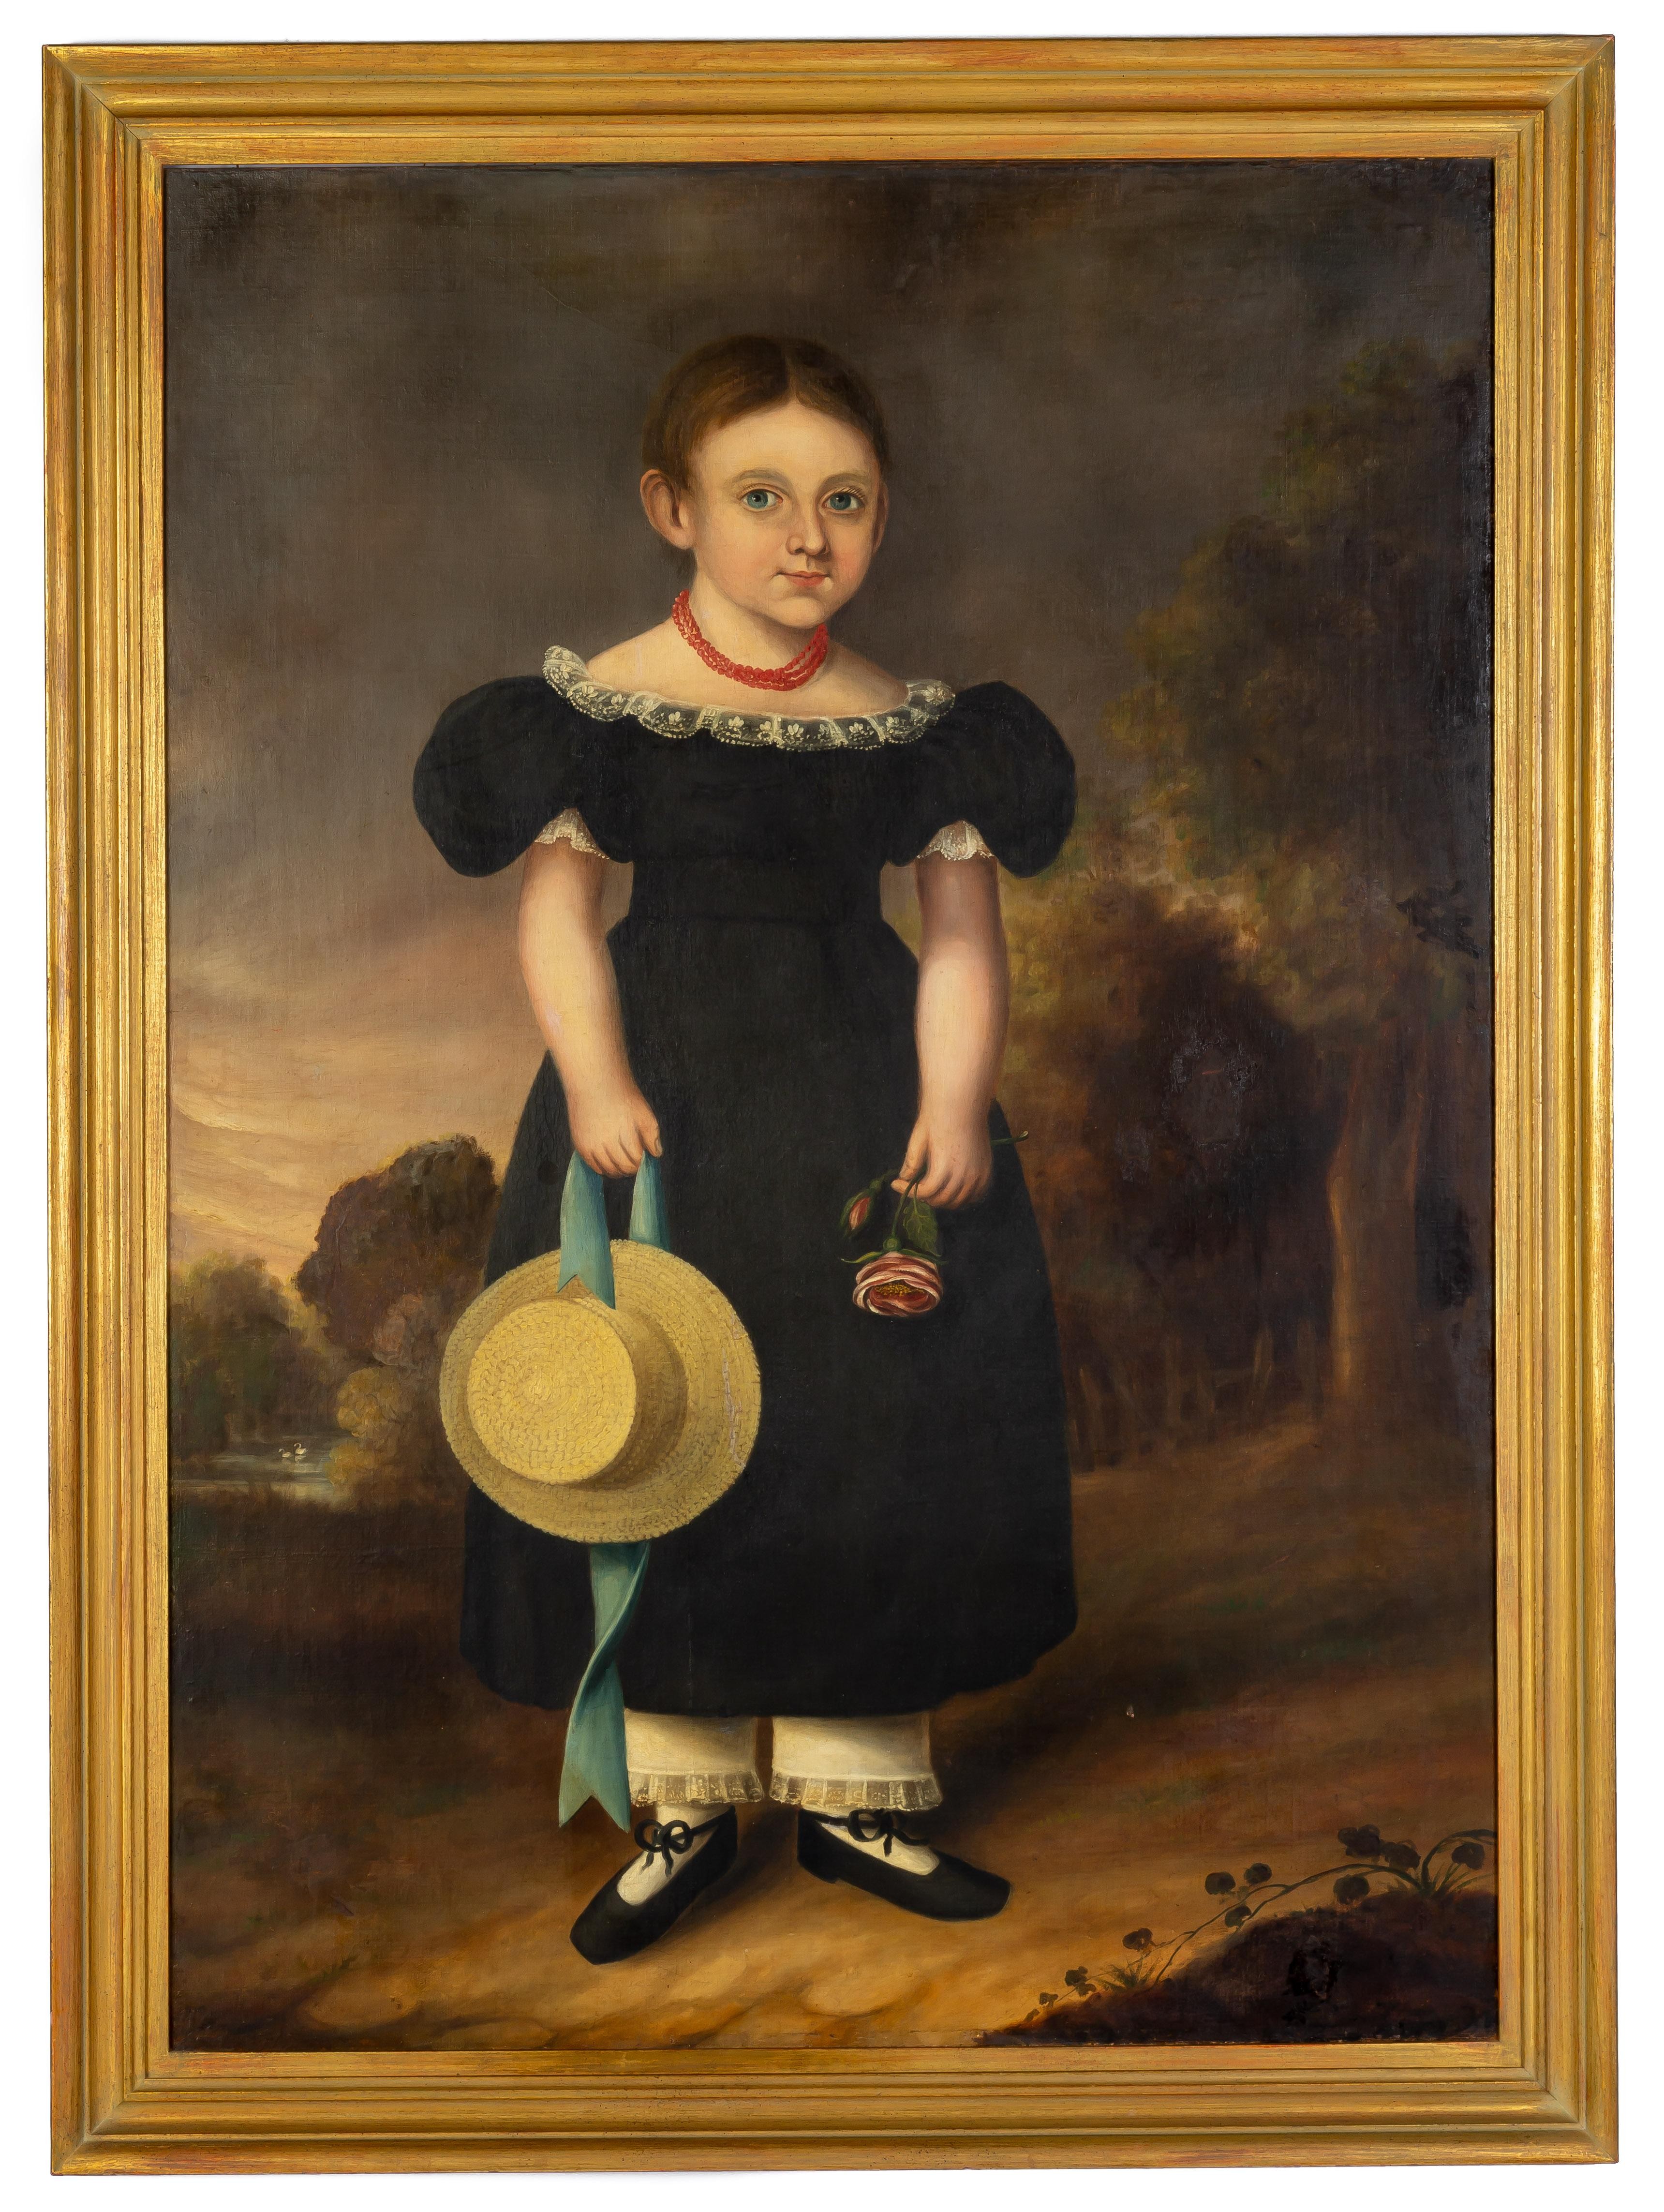 ATTRIBUTED TO ABRAHAM PARSELL (CIRCA,